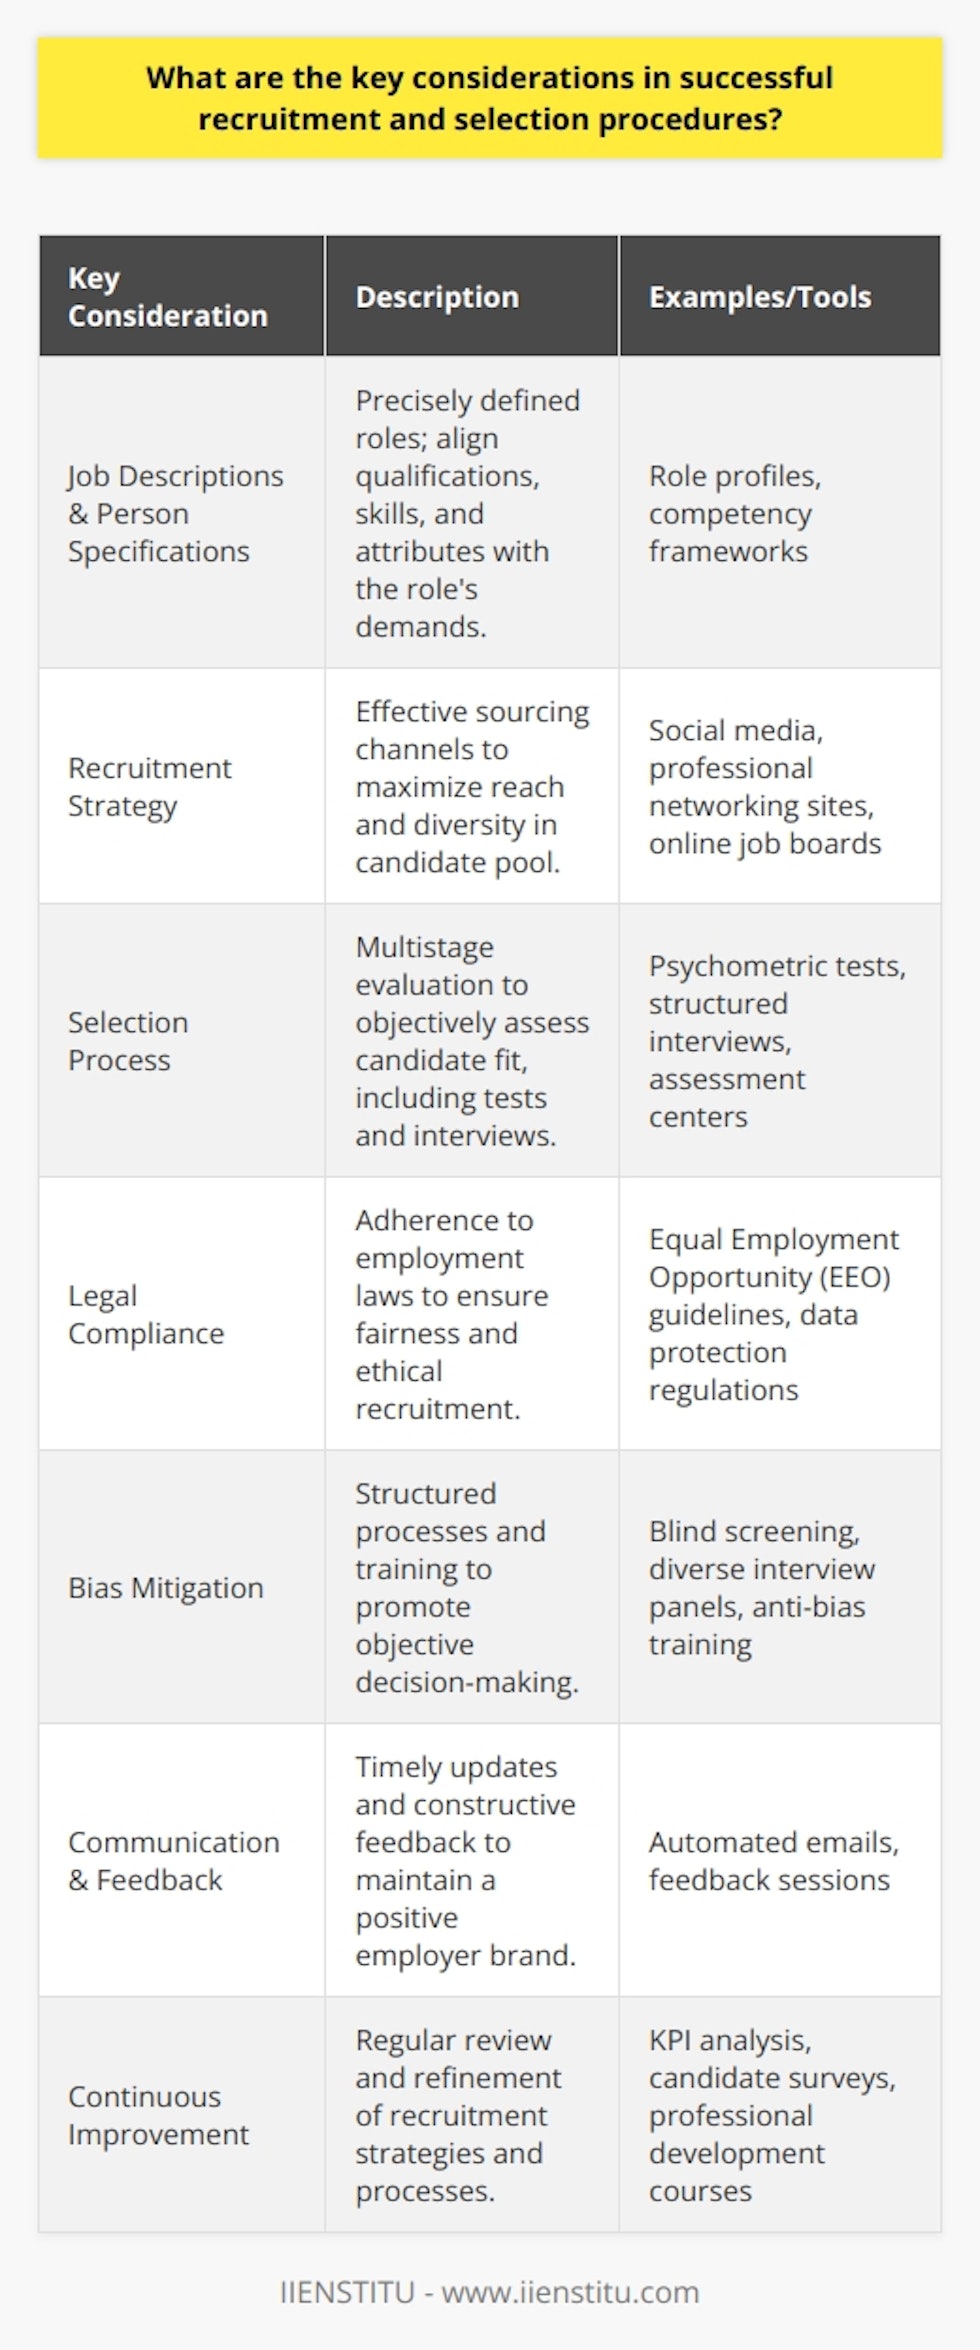 Recruitment and selection are key processes in human resource management, pivotal to the long-term performance and sustainability of an organization. With the right approach, they can facilitate the sourcing of candidates best suited to both the roles and the organizational culture. Below are the key considerations that organizations must take into account to ensure the success of their recruitment and selection procedures.Firstly, precisely defined job descriptions and person specifications are fundamental. These documents should be robust and reflect the real nature of the job and the essential and desirable criteria for candidates, aligning qualifications, experience, skills, and personal attributes with the role’s demands. Transparency in these specifications allows potential applicants to self-assess their fit for the role, thus streamlining the selection process by filtering candidates at an early stage.Secondly, determining an effective recruitment strategy is vital. This strategy might encompass various avenues for sourcing candidates, such as social media platforms, professional networking sites, company career pages, and online job boards. Adopting a multi-channel approach increases the reach of the job posting and helps in tapping into a diverse candidate pool.The selection process is another area requiring careful consideration. It typically involves multiple stages, including an initial review of applications, shortlisting, assessment tests, interviews, and background checks. Each step must be designed to objectively evaluate the candidate's fit for the role. For instance, psychometric testing can provide insights into a candidate's behavior and cognitive abilities, which are difficult to gauge from interviews alone.Interviews should be structured and behavioral-based, focusing on past performance and behavior as indicators of future success. It’s recommended to employ a panel of interviewers with varied perspectives to mitigate individual biases and ensure a well-rounded evaluation.The legal framework is also a key consideration. Recruitment and selection procedures must adhere strictly to laws regarding employment, equal opportunity, and data protection. This compliance is not only a legal requirement but also boosts the image of the organization as a fair and ethical employer.Companies should also ensure rigor in the process to avoid bias or discrimination. Each candidate should be assessed against the same criteria, and decision-makers should be trained in objective evaluation methods. The use of technology can aid in this, providing structured evaluation frameworks which reduce the prospect of unconscious bias.Feedback and communication are essential throughout the recruitment process. Candidates should receive timely updates about their application status and constructive feedback if they are unsuccessful. This consideration not only preserves the employer brand but also respects the time and effort applicants invest in the process.Lastly, continuous improvement of recruitment and selection procedures is paramount. Regular review sessions should be executed to refine strategies and processes. These reviews could involve analyzing recruitment metrics, collecting candidate feedback, and staying abreast of best practices in talent acquisition.In implementing these considerations, one significant resource for organizations is educational platforms such as IIENSTITU, which offer courses and insights on modern recruitment strategies and practices. Such resources are invaluable in equipping HR professionals with up-to-date knowledge and skills that can be directly applied to enhance recruitment and selection methodologies.In sum, the key to successful recruitment and selection procedures lies in clarity, consistency, legal adherence, fairness, and effective communication. These considerations form the backbone of a strategic approach that attracts high-quality candidates, fosters a positive employer reputation, and ensures the candidates selected will contribute positively to the organization’s goals and culture.